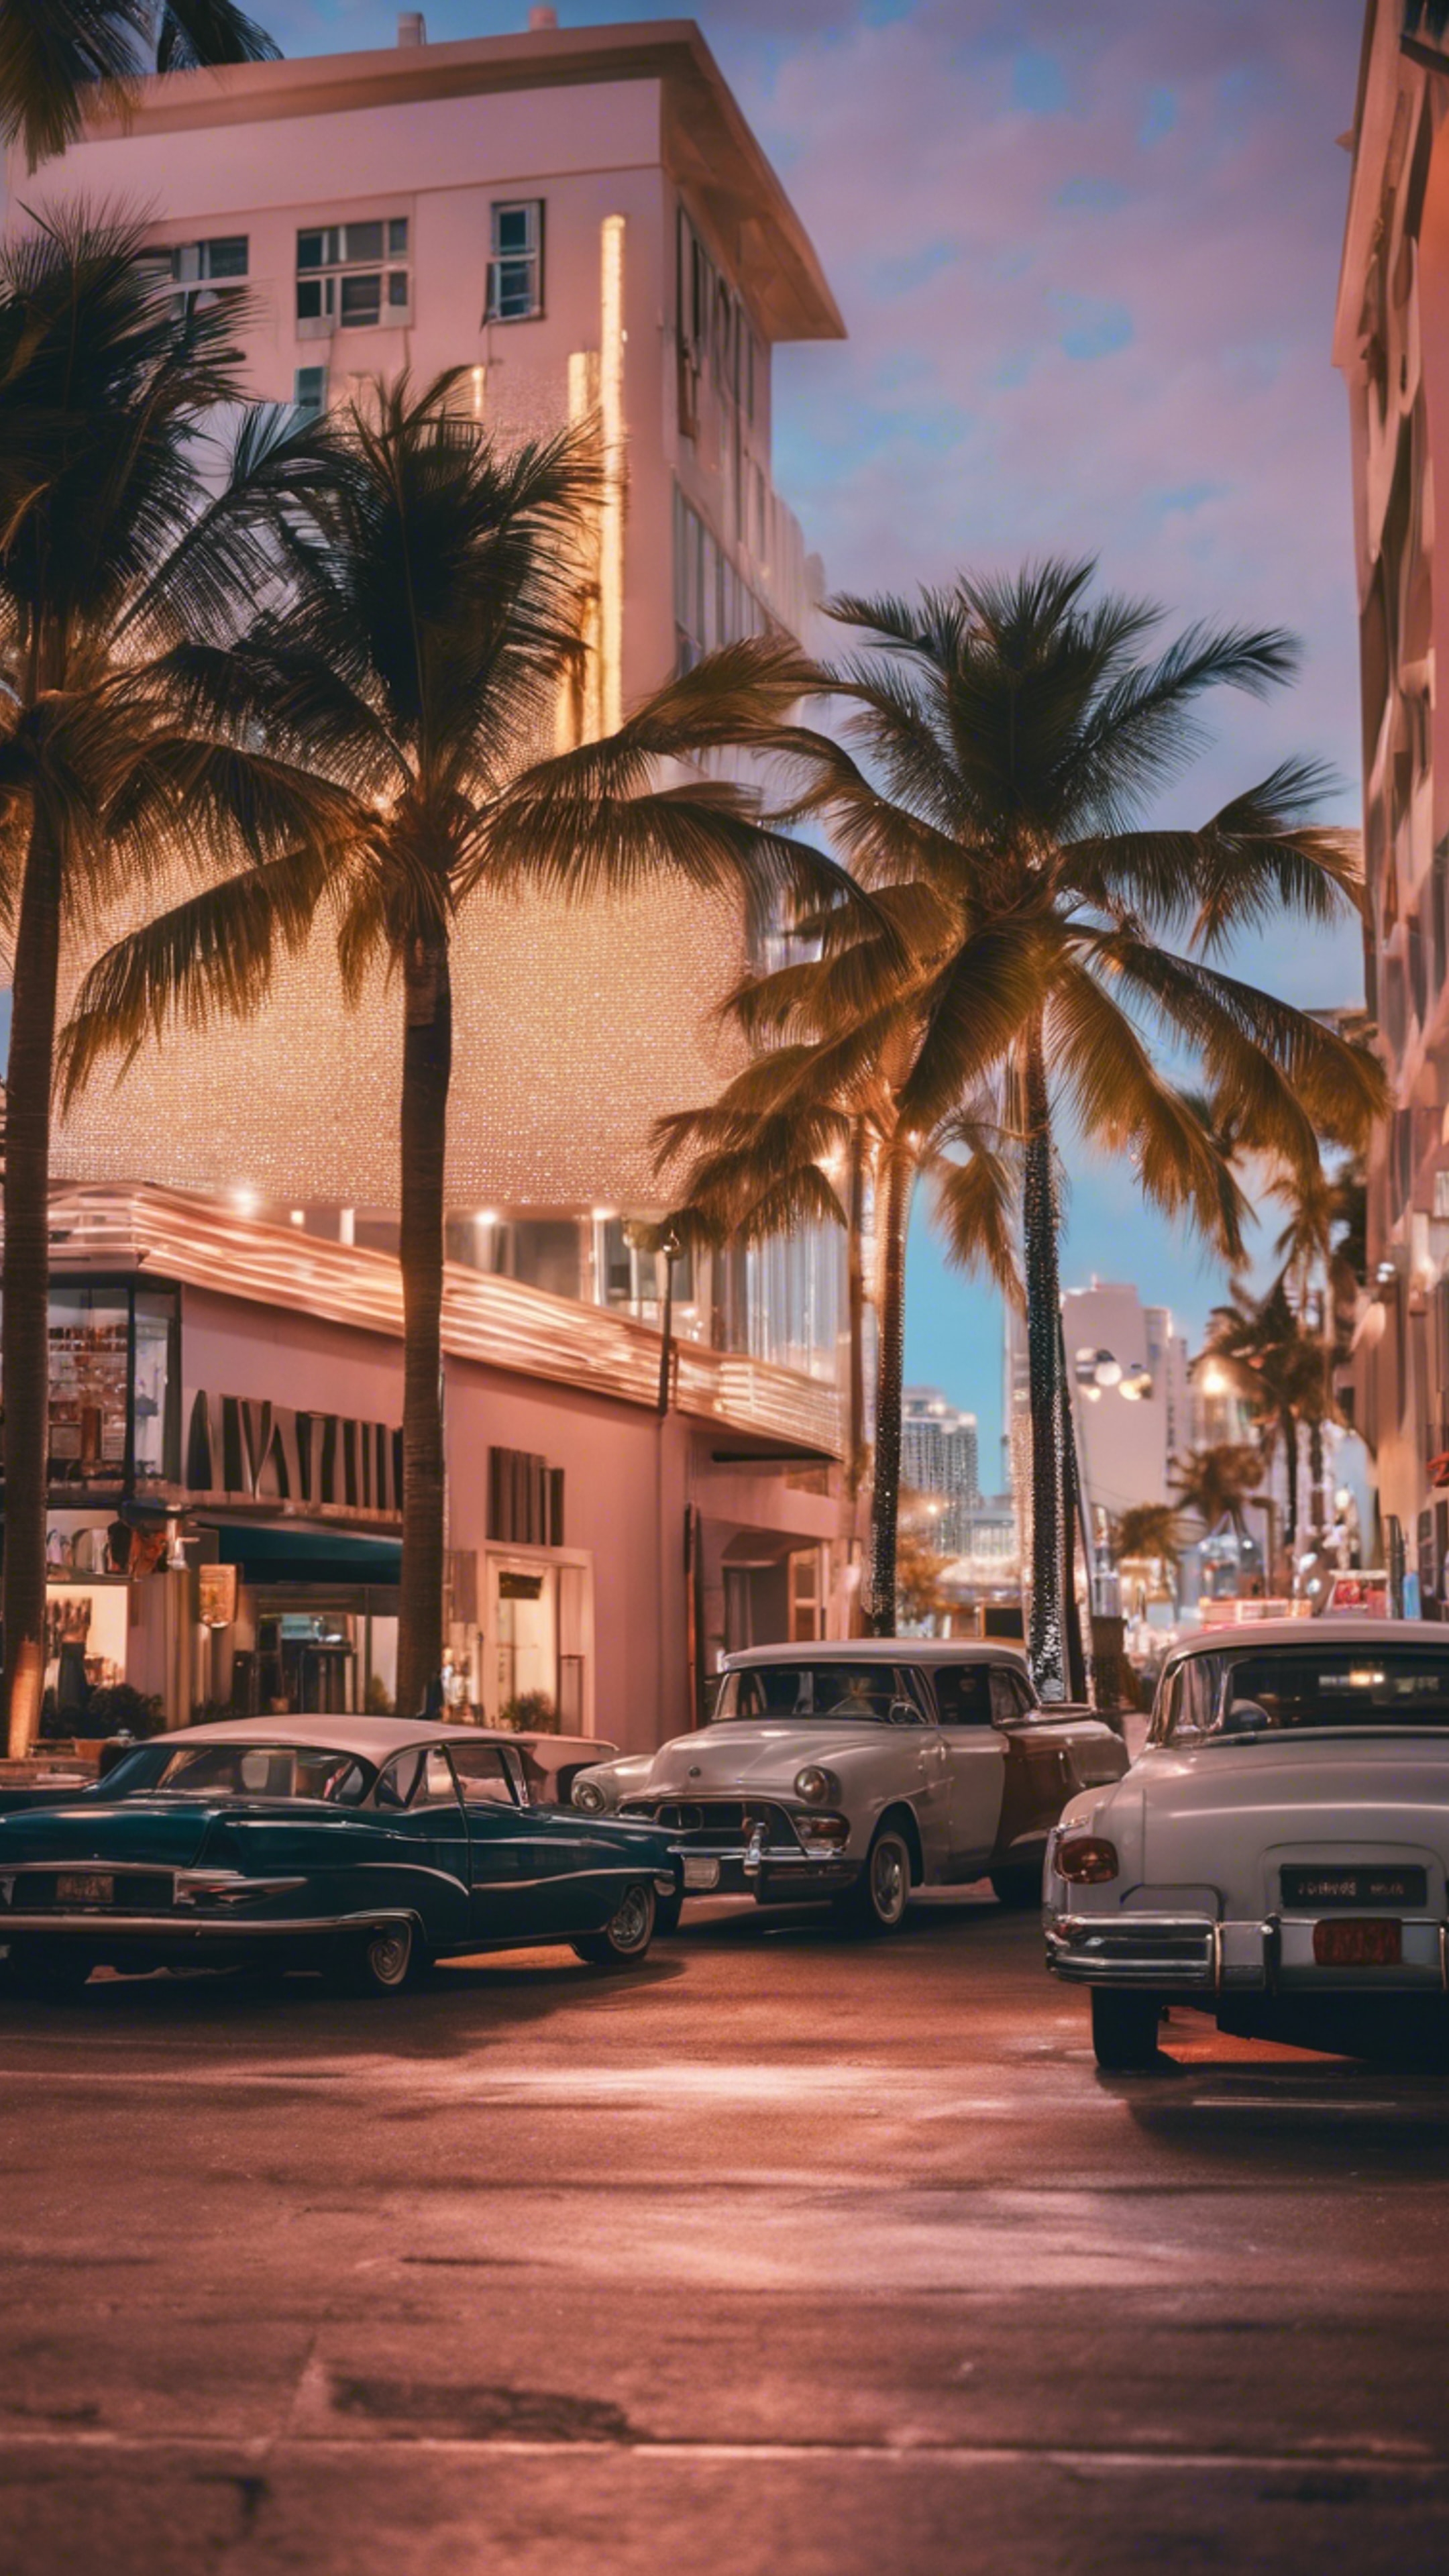 A bustling Miami Beach street scene, with art deco buildings and palm trees, vibrant nightlife atmosphere. Tapeta[c899e7f744884bb387cd]